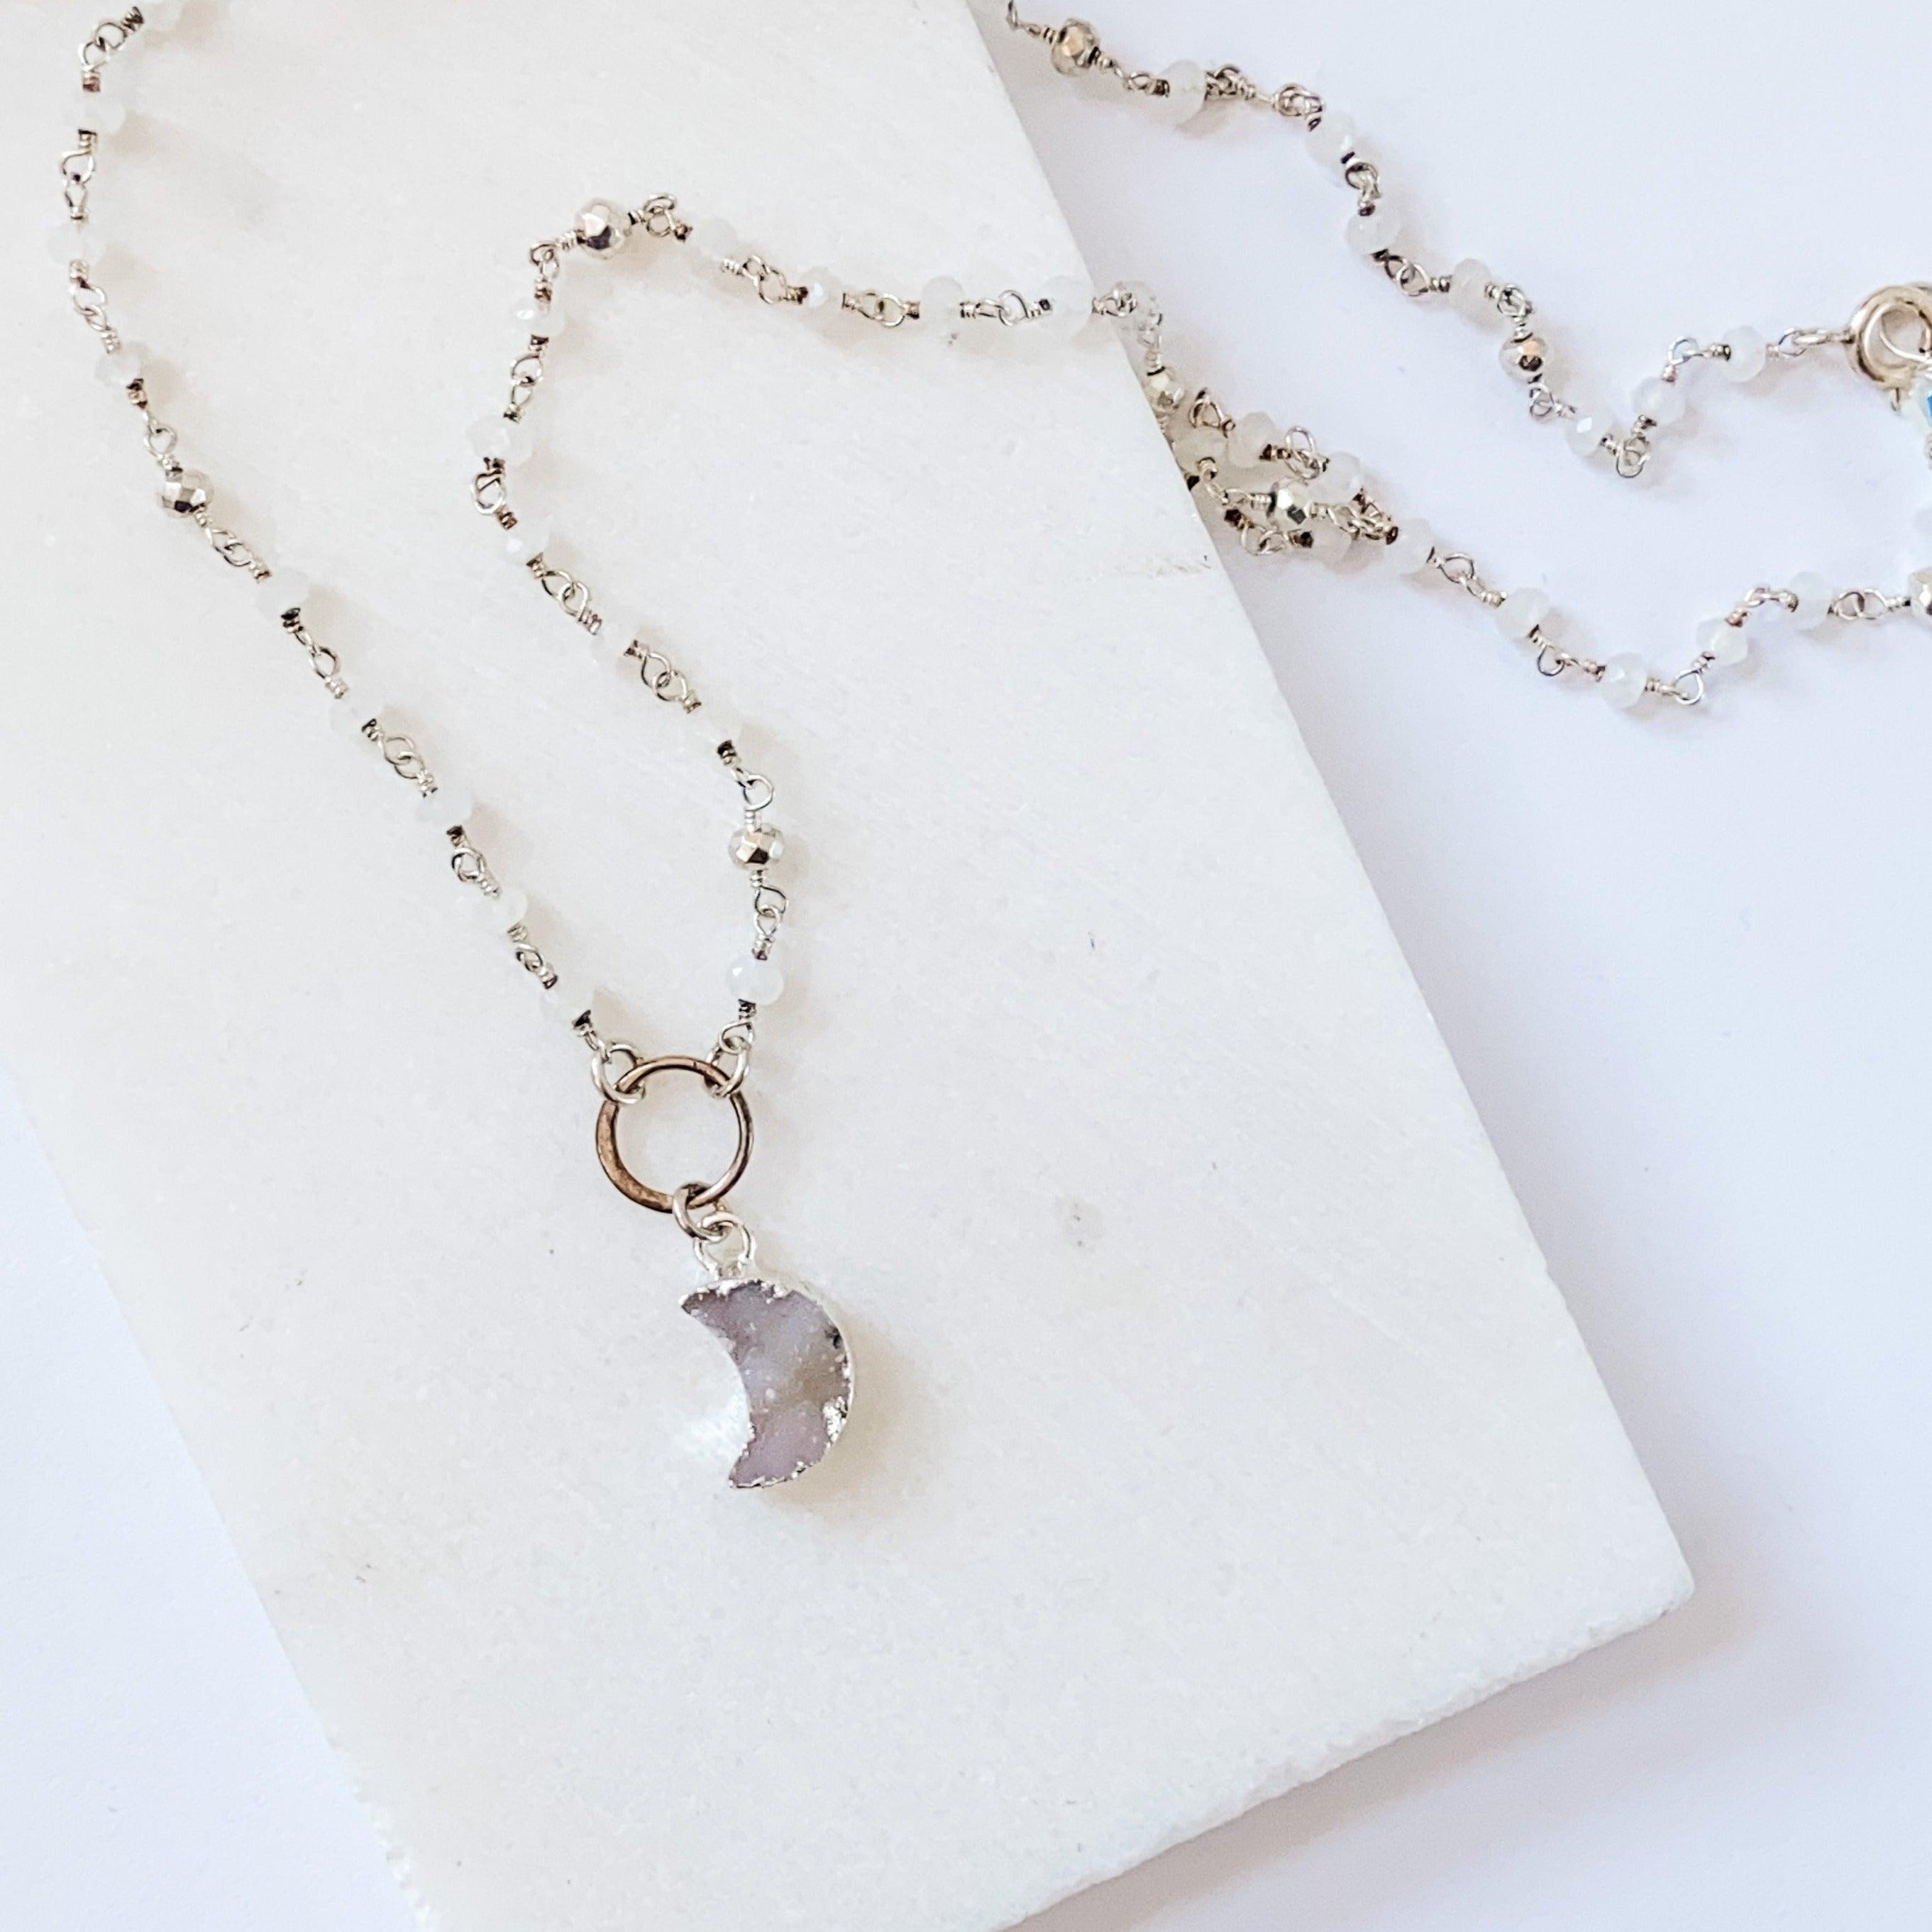 Druzy Quartz Mini Moon and Moonstone with Sterling Silver Circlet Necklace Uni-T Necklace